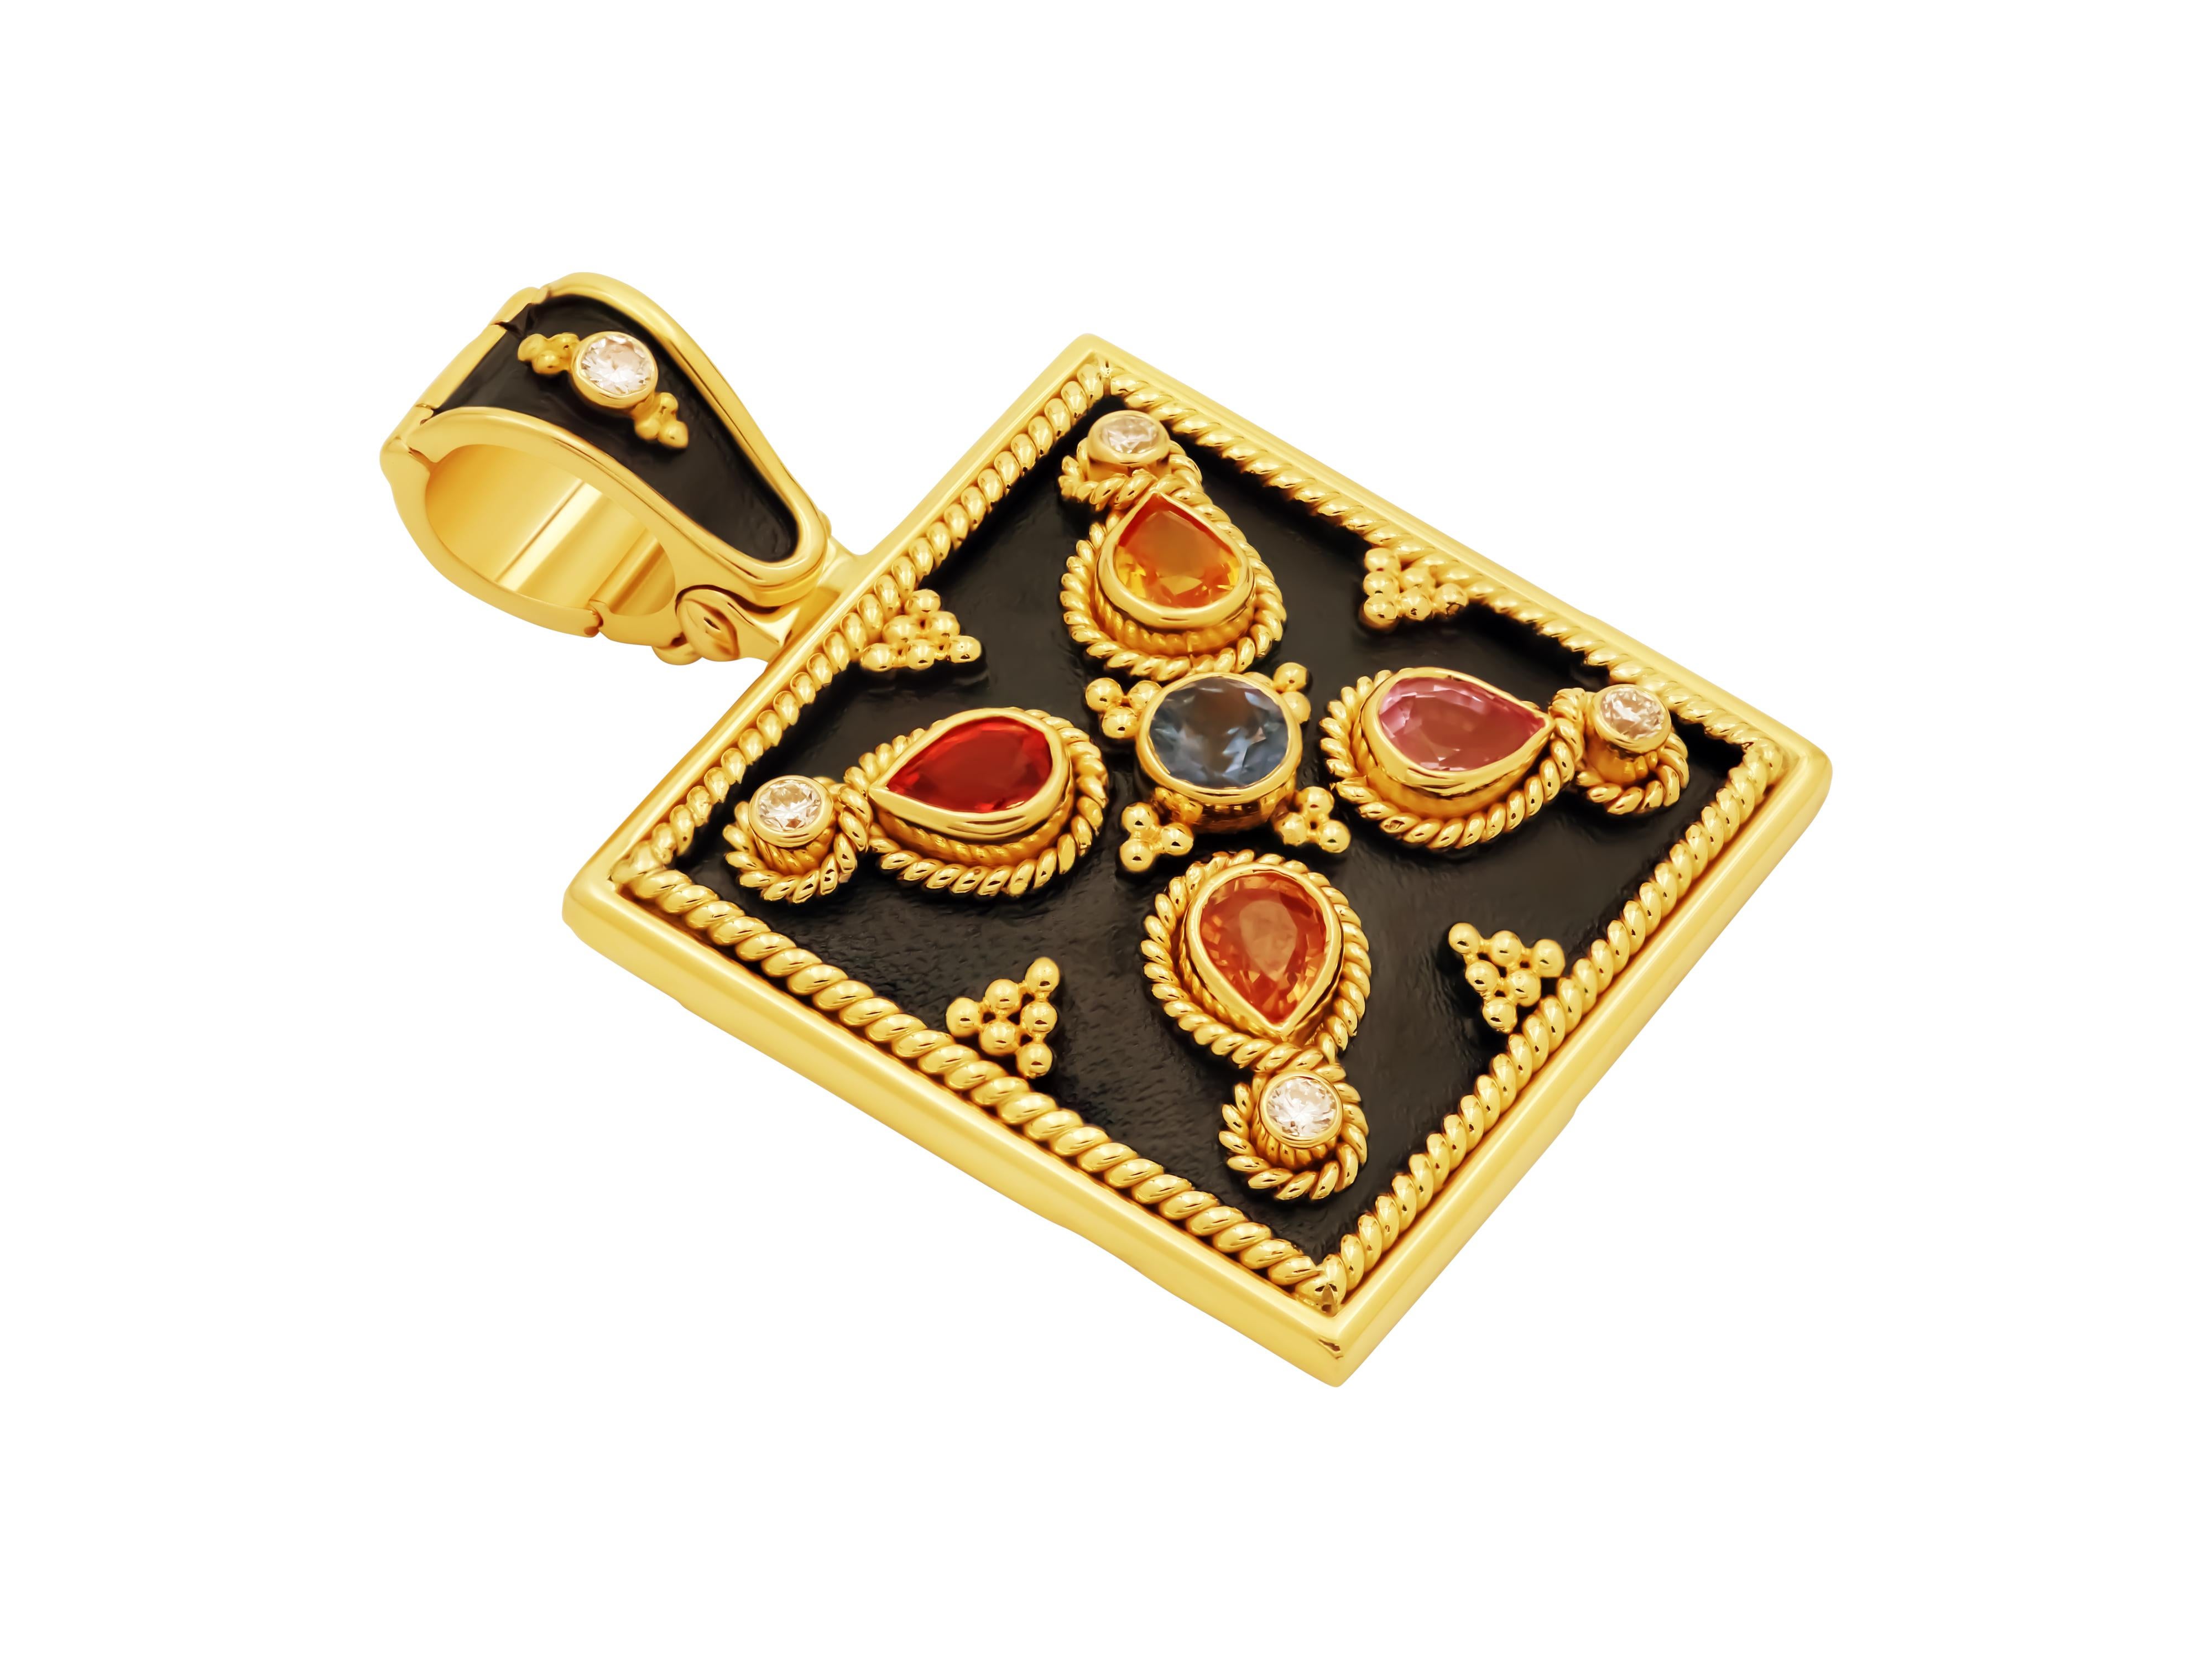 Colorful noir pendant in 18k yellow gold. Pear cut 1.02 carats sapphires in every color and 0.10 carats brilliant cut diamonds circle around this pendant with beautiful filigrees and granulation and black platinum background for high contrast. With